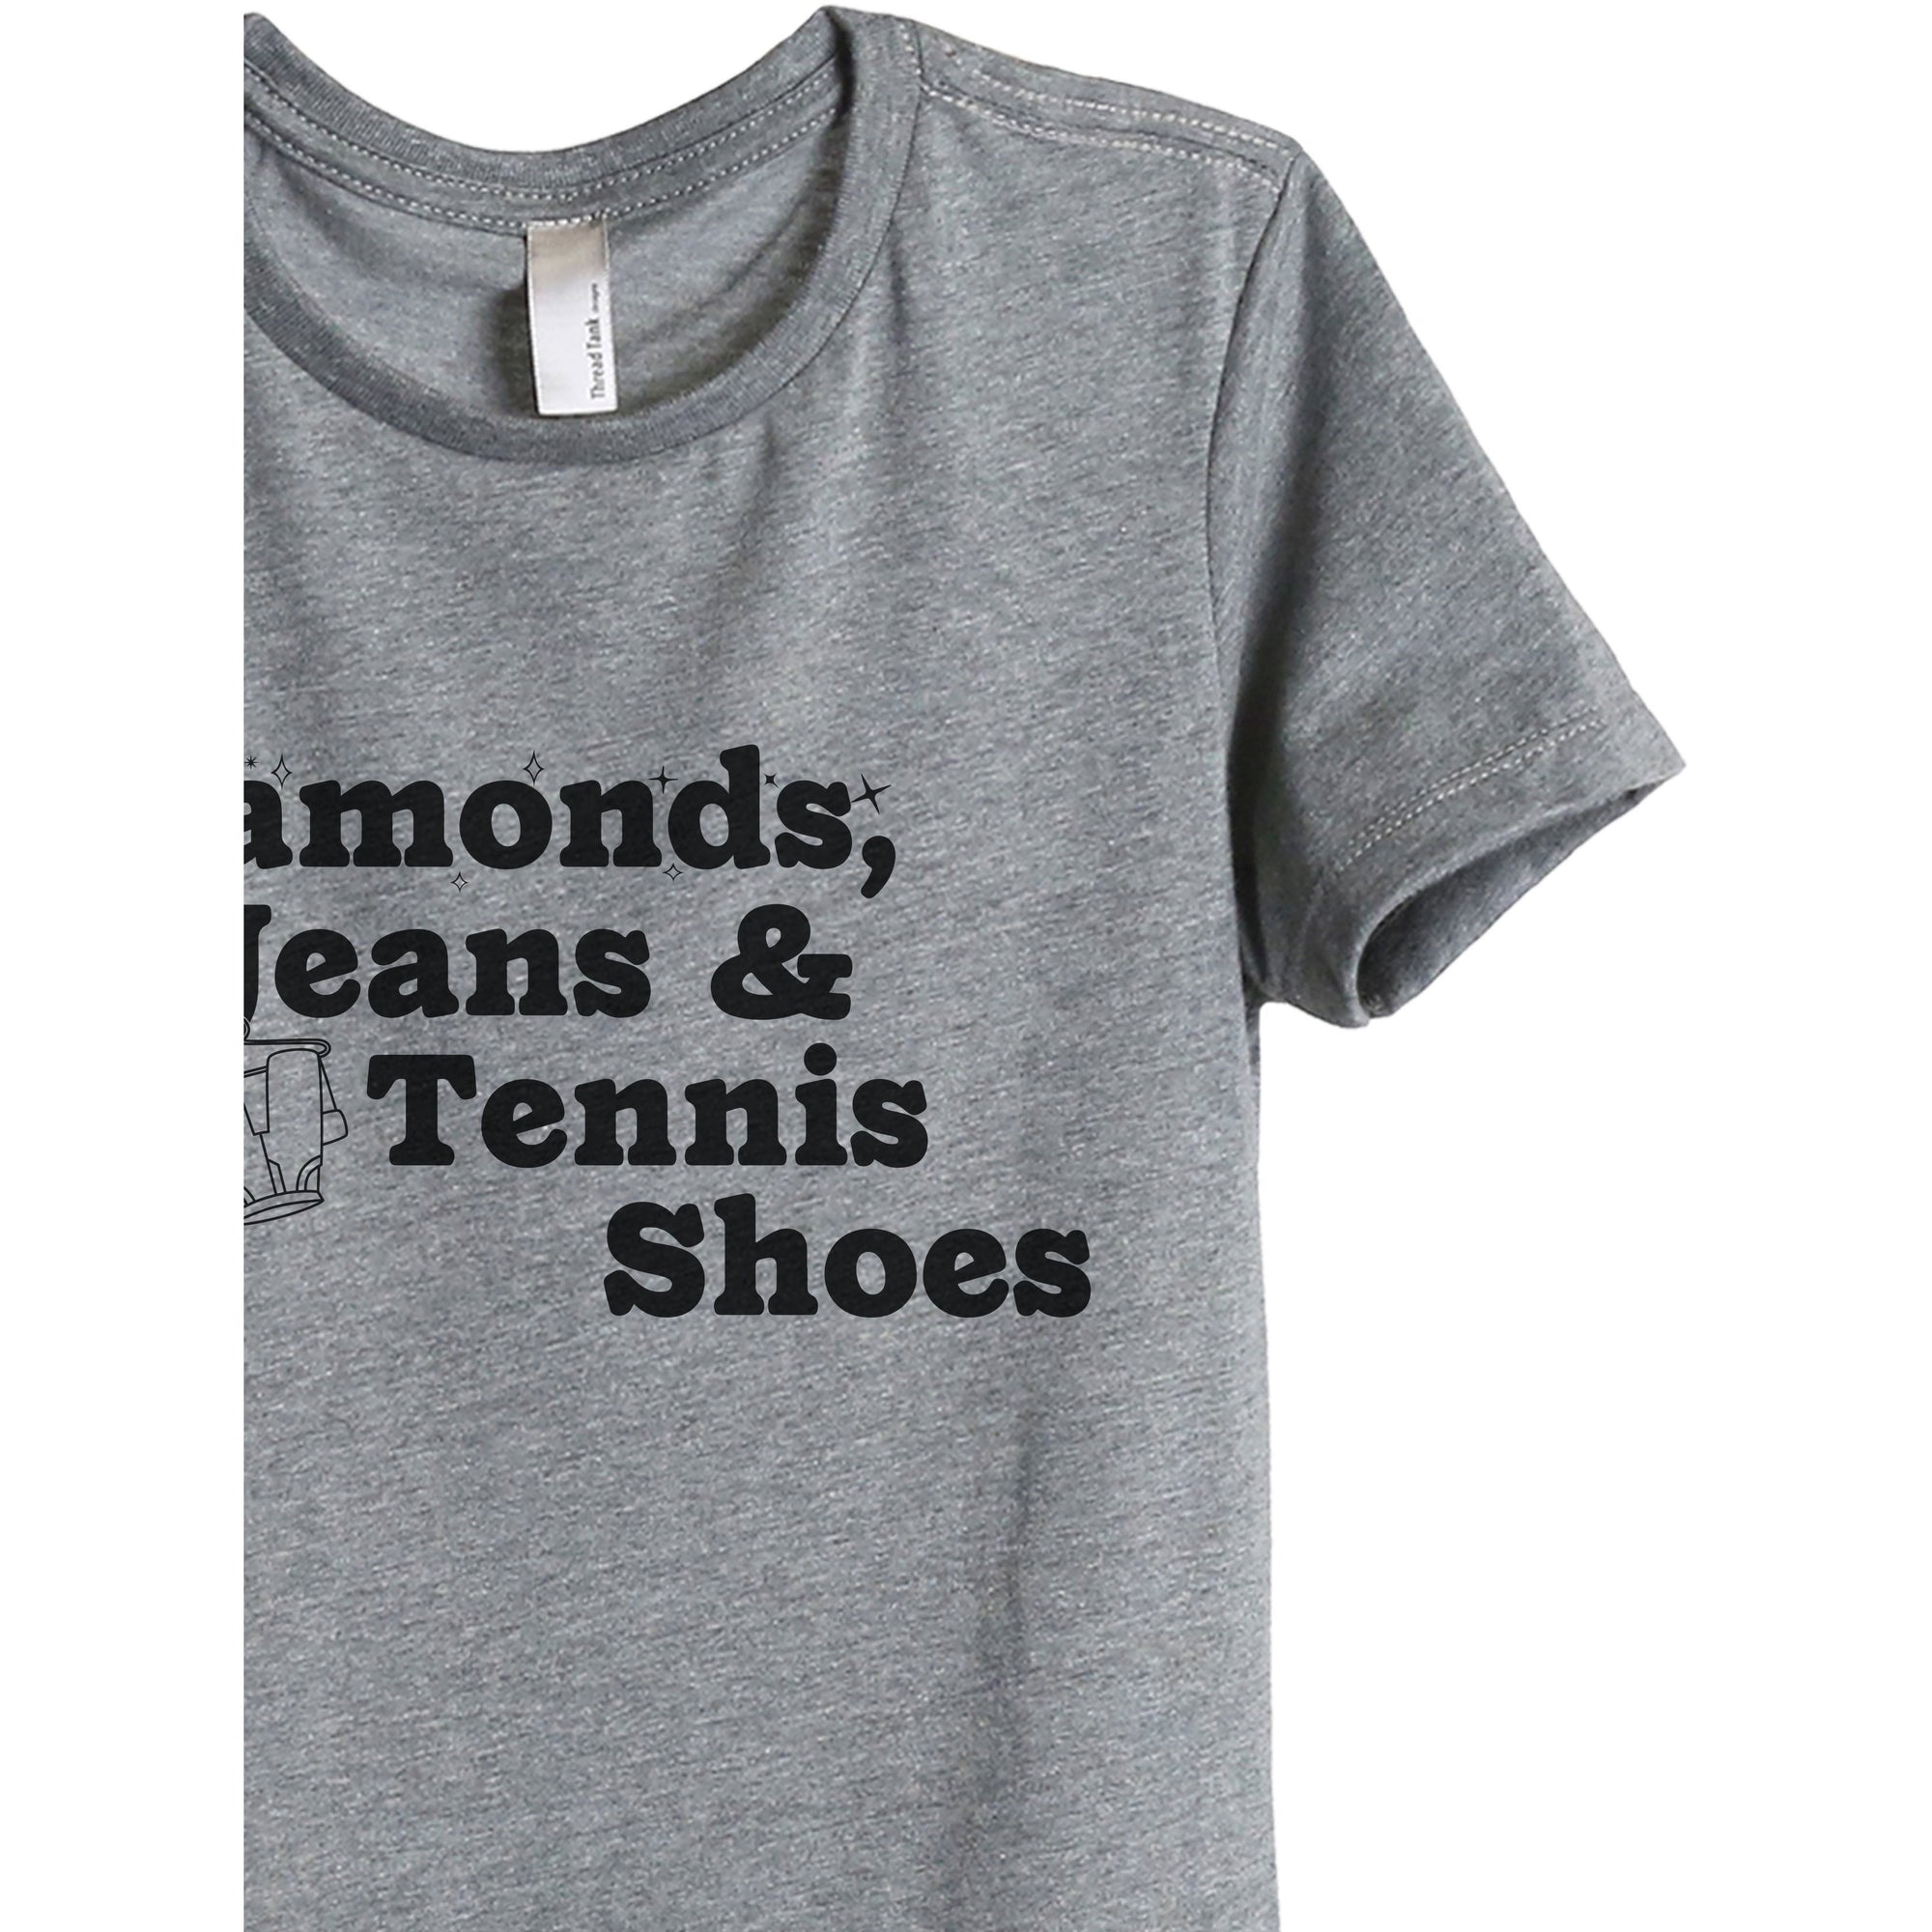 Diamonds, Jeans And Tennis Shoes - Stories You Can Wear by Thread Tank